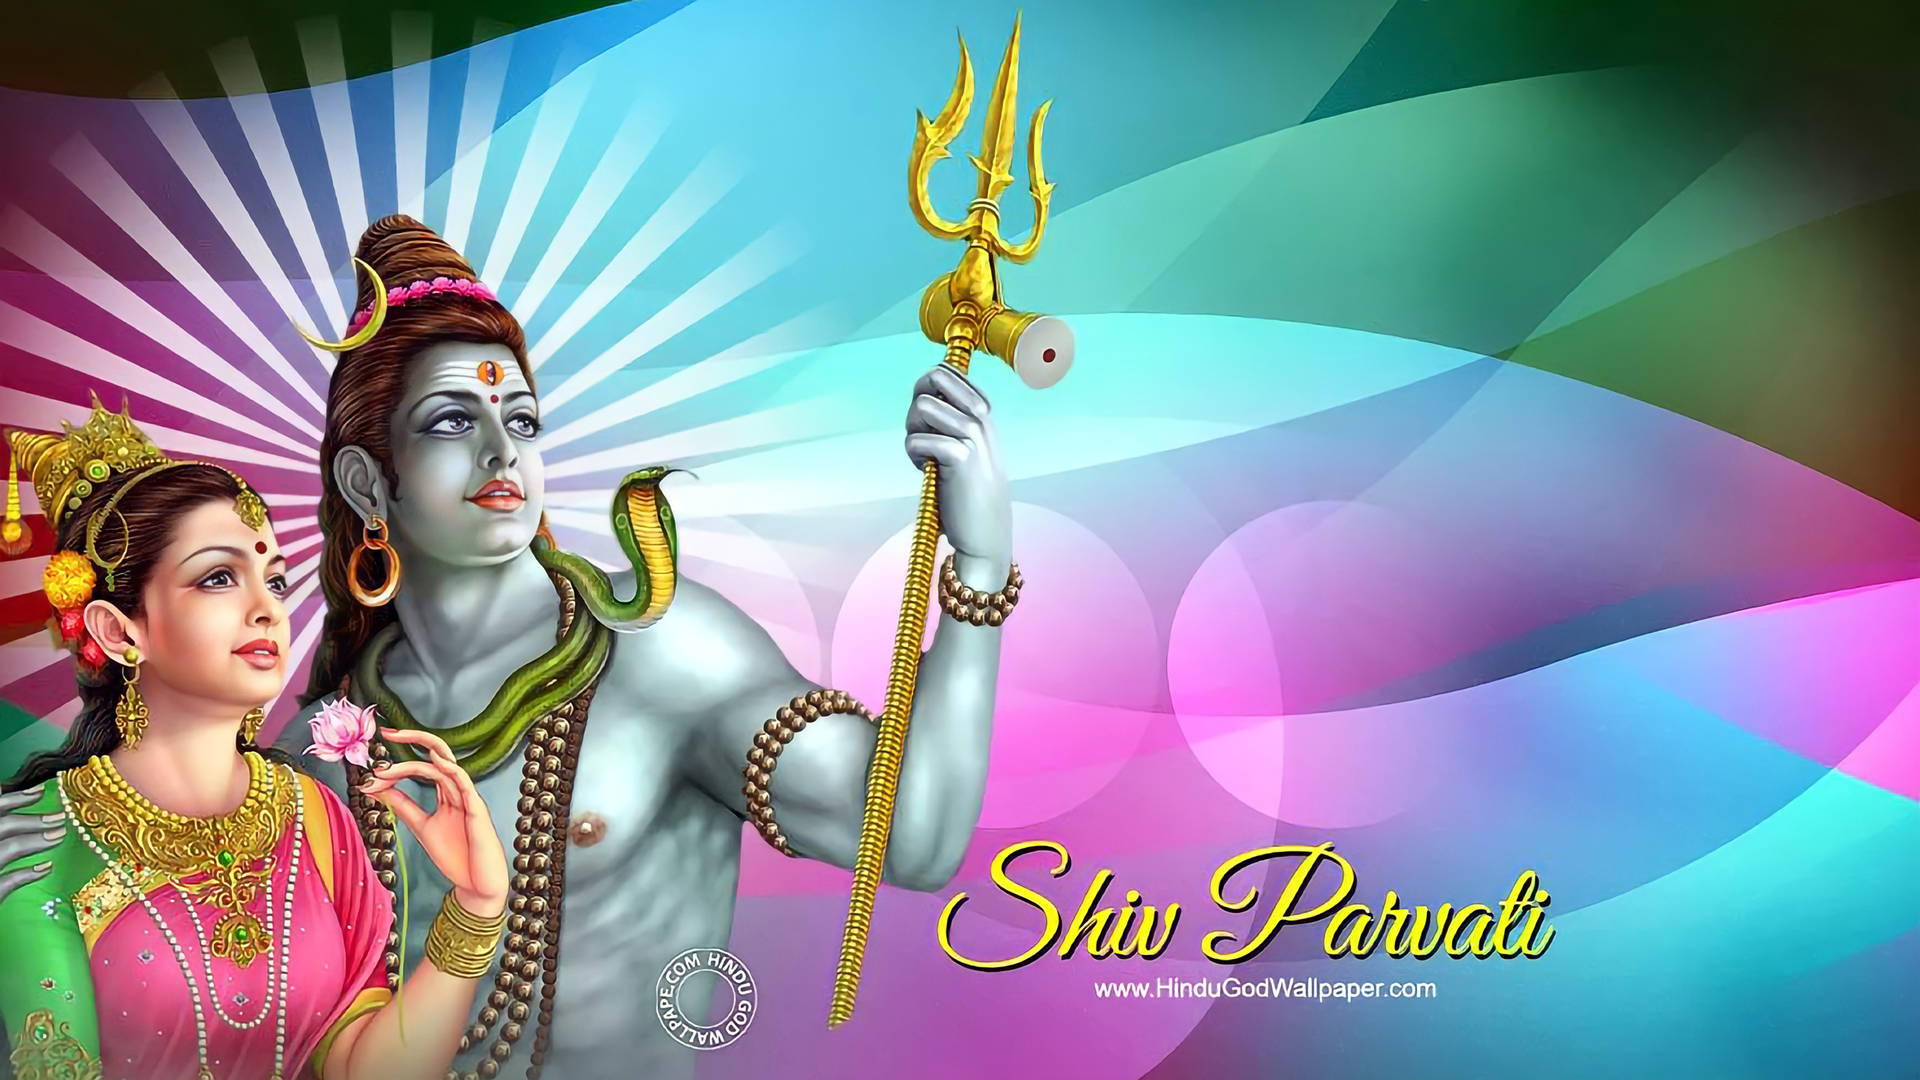 Caption: Divine Outlook Of Lord Shiva And Goddess Parvati In Hd Background